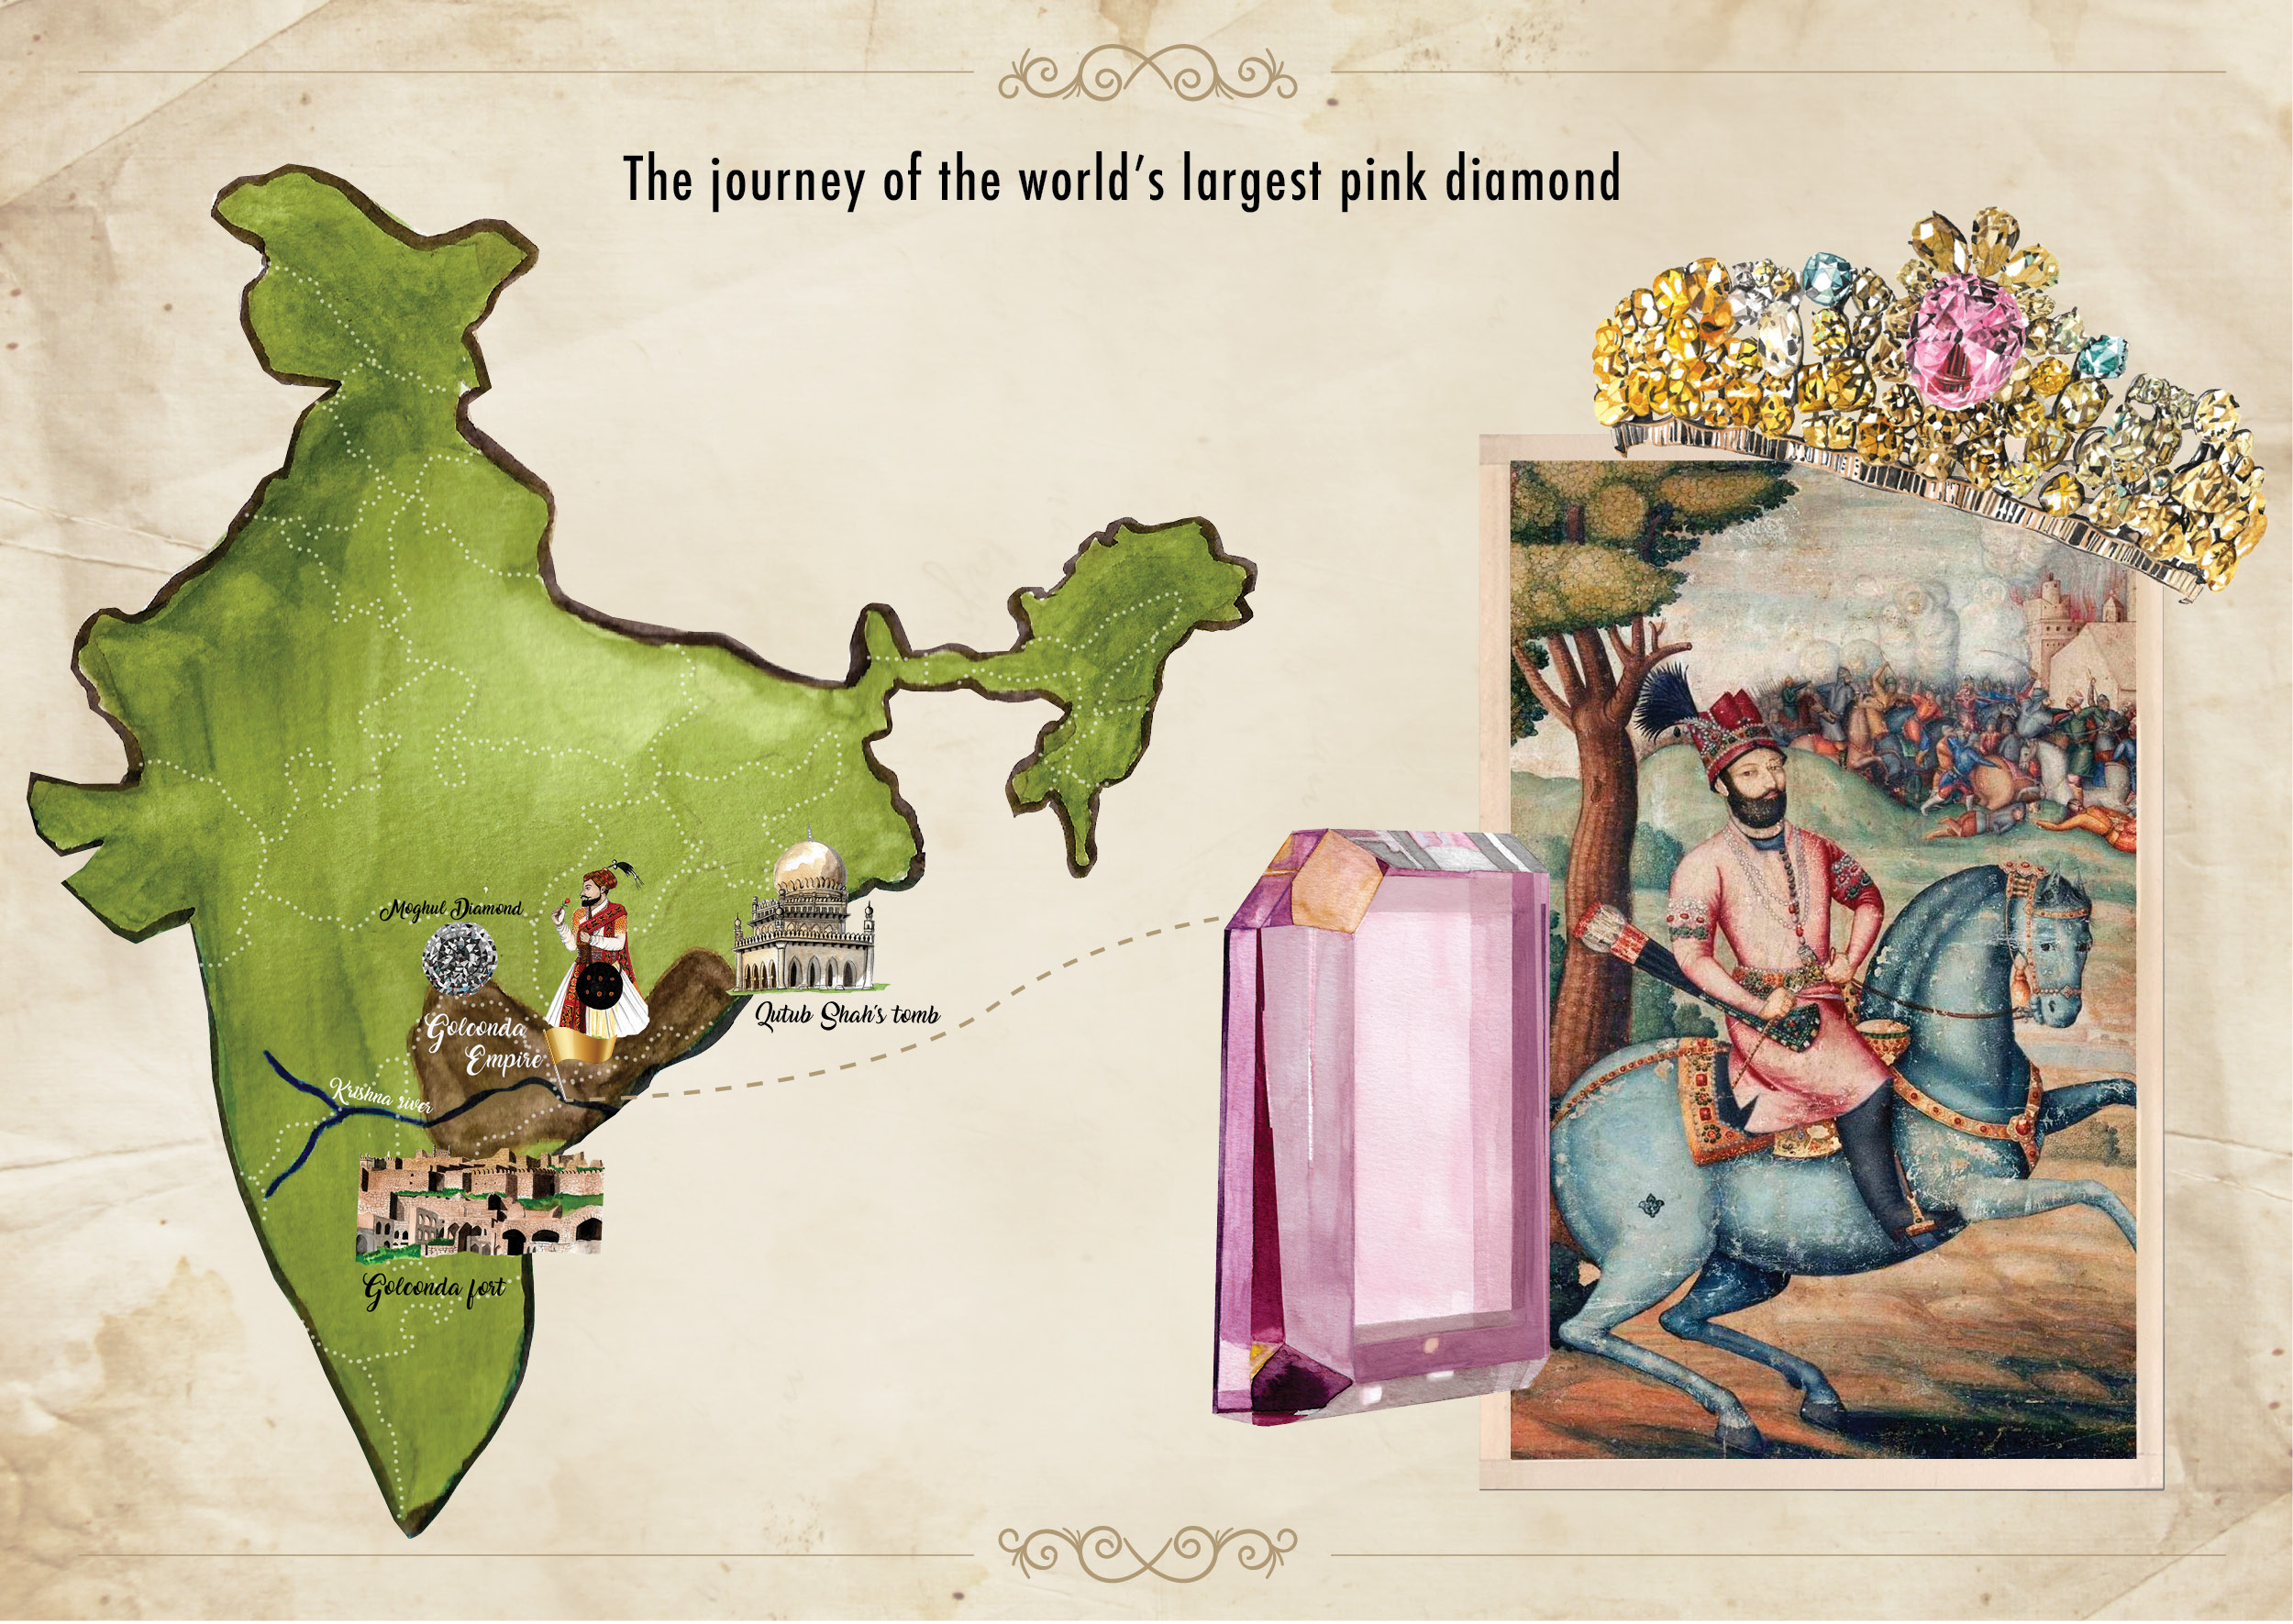 The Great Table Diamond: Capturing the Journey of the World's Largest Pink Diamond